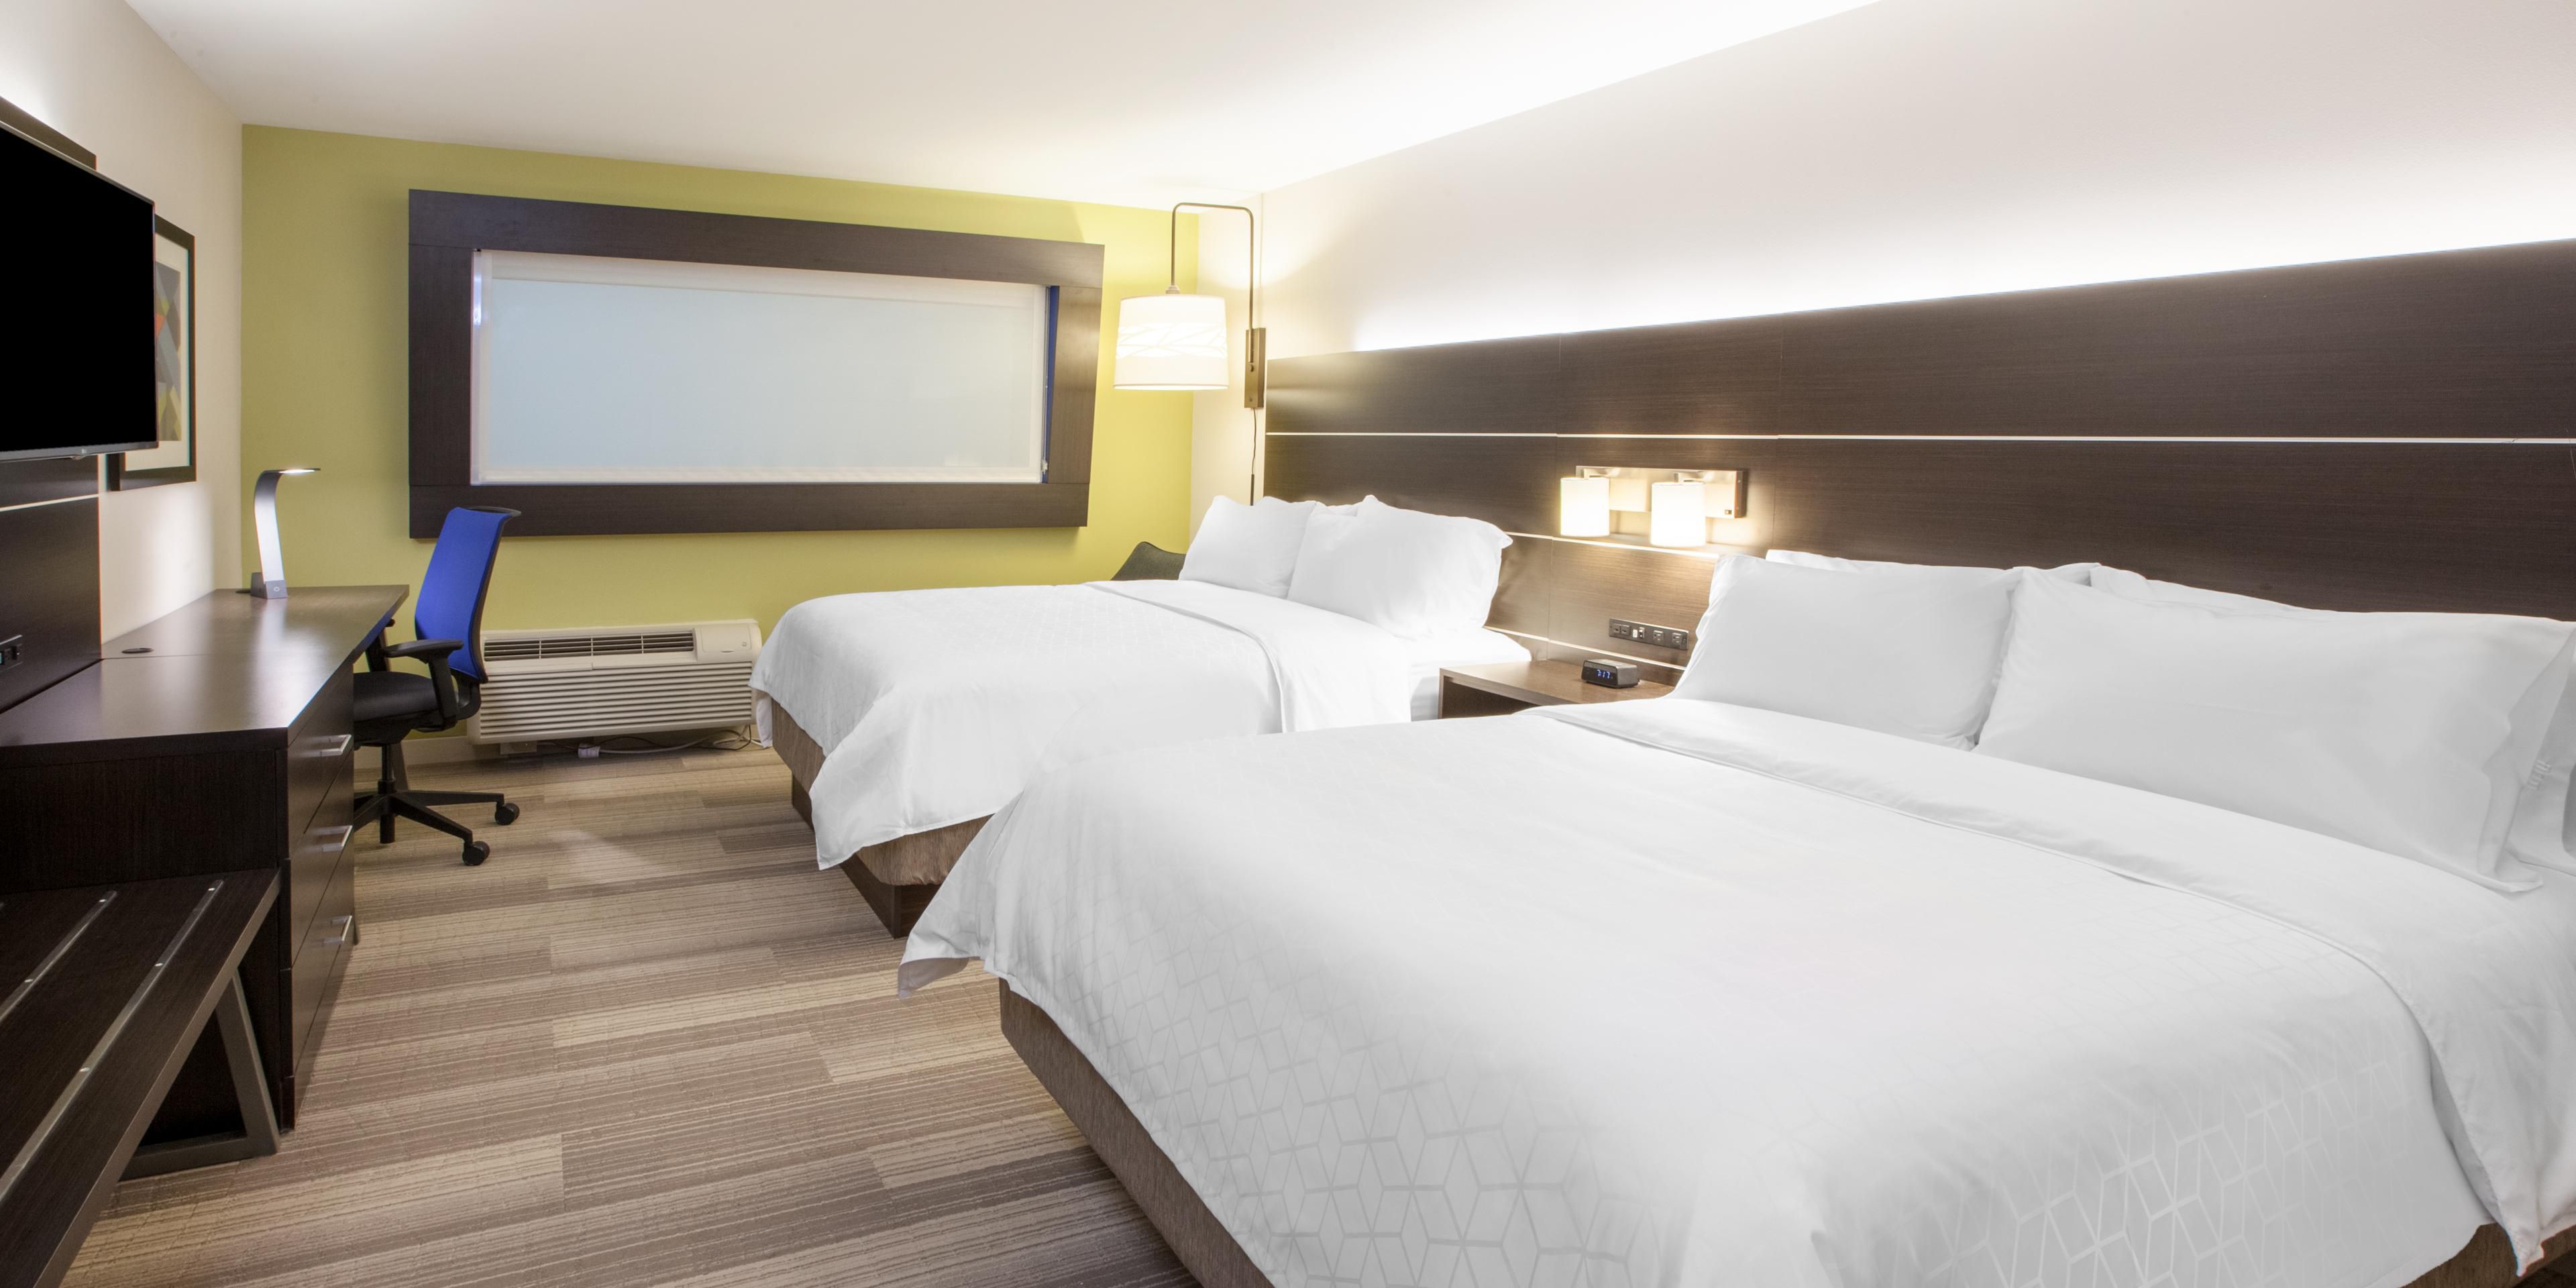 In line with St. Albert smart city designation back in 2019 as the 3rd tech smart city in the world after Vienna and London (UK): The Holiday Inn Express St Albert offers Smart TV, Smart motion sensor thermostats/ motion sensor bathroom lights/ noise proof headboards/ high speed internet. 